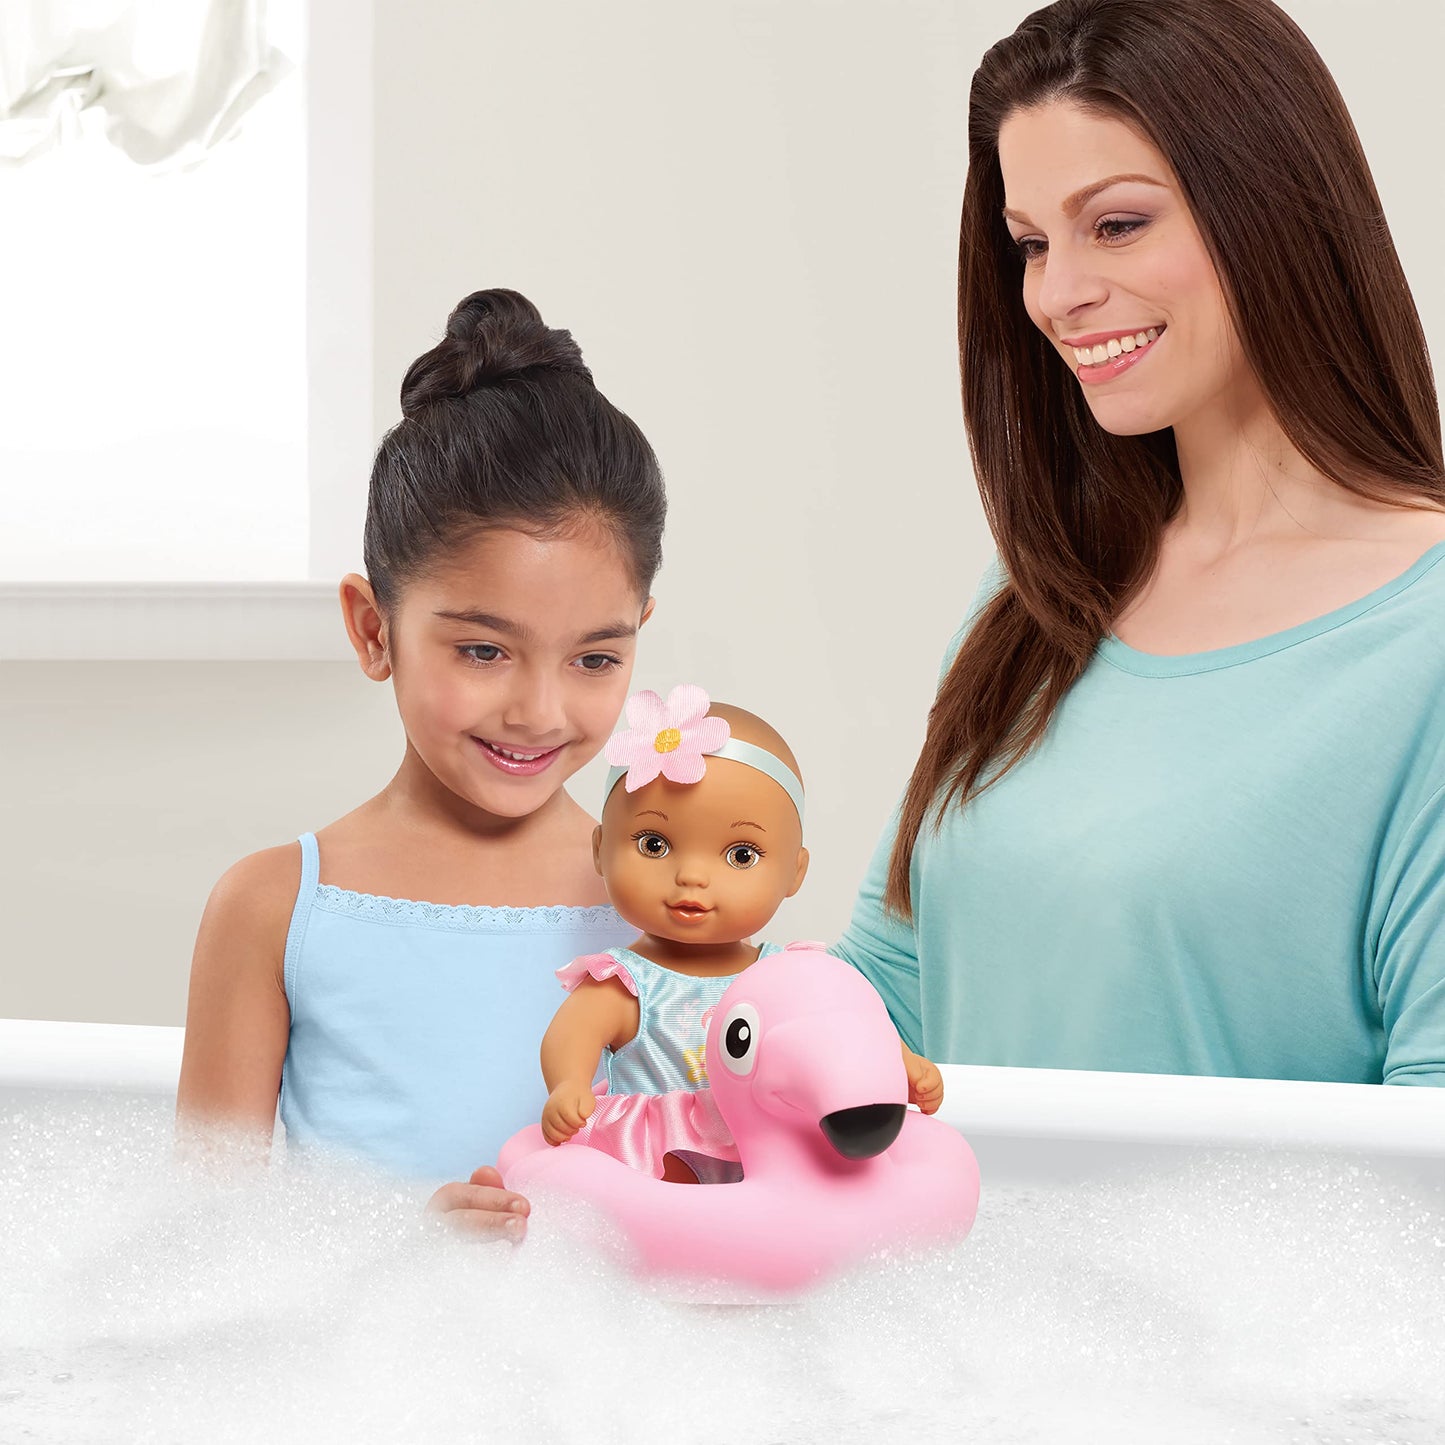 WaterBabies Doll Bathtime Fun Flamingo, Support a Partnership with charity: water, Water Filled Baby Doll, Kids Toys for Ages 3 Up by Just Play